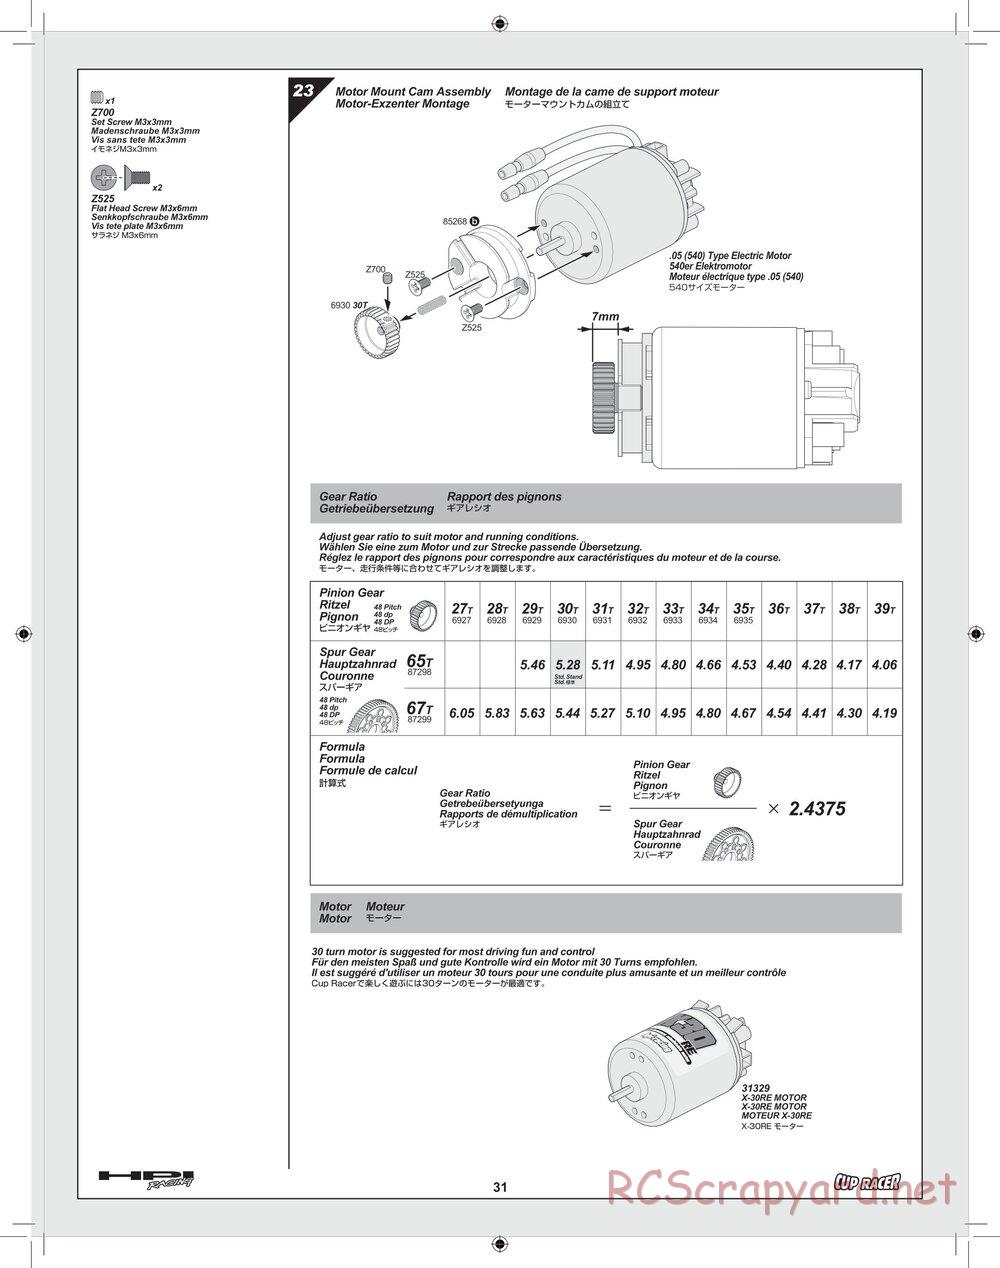 HPI - Cup Racer - Manual - Page 31